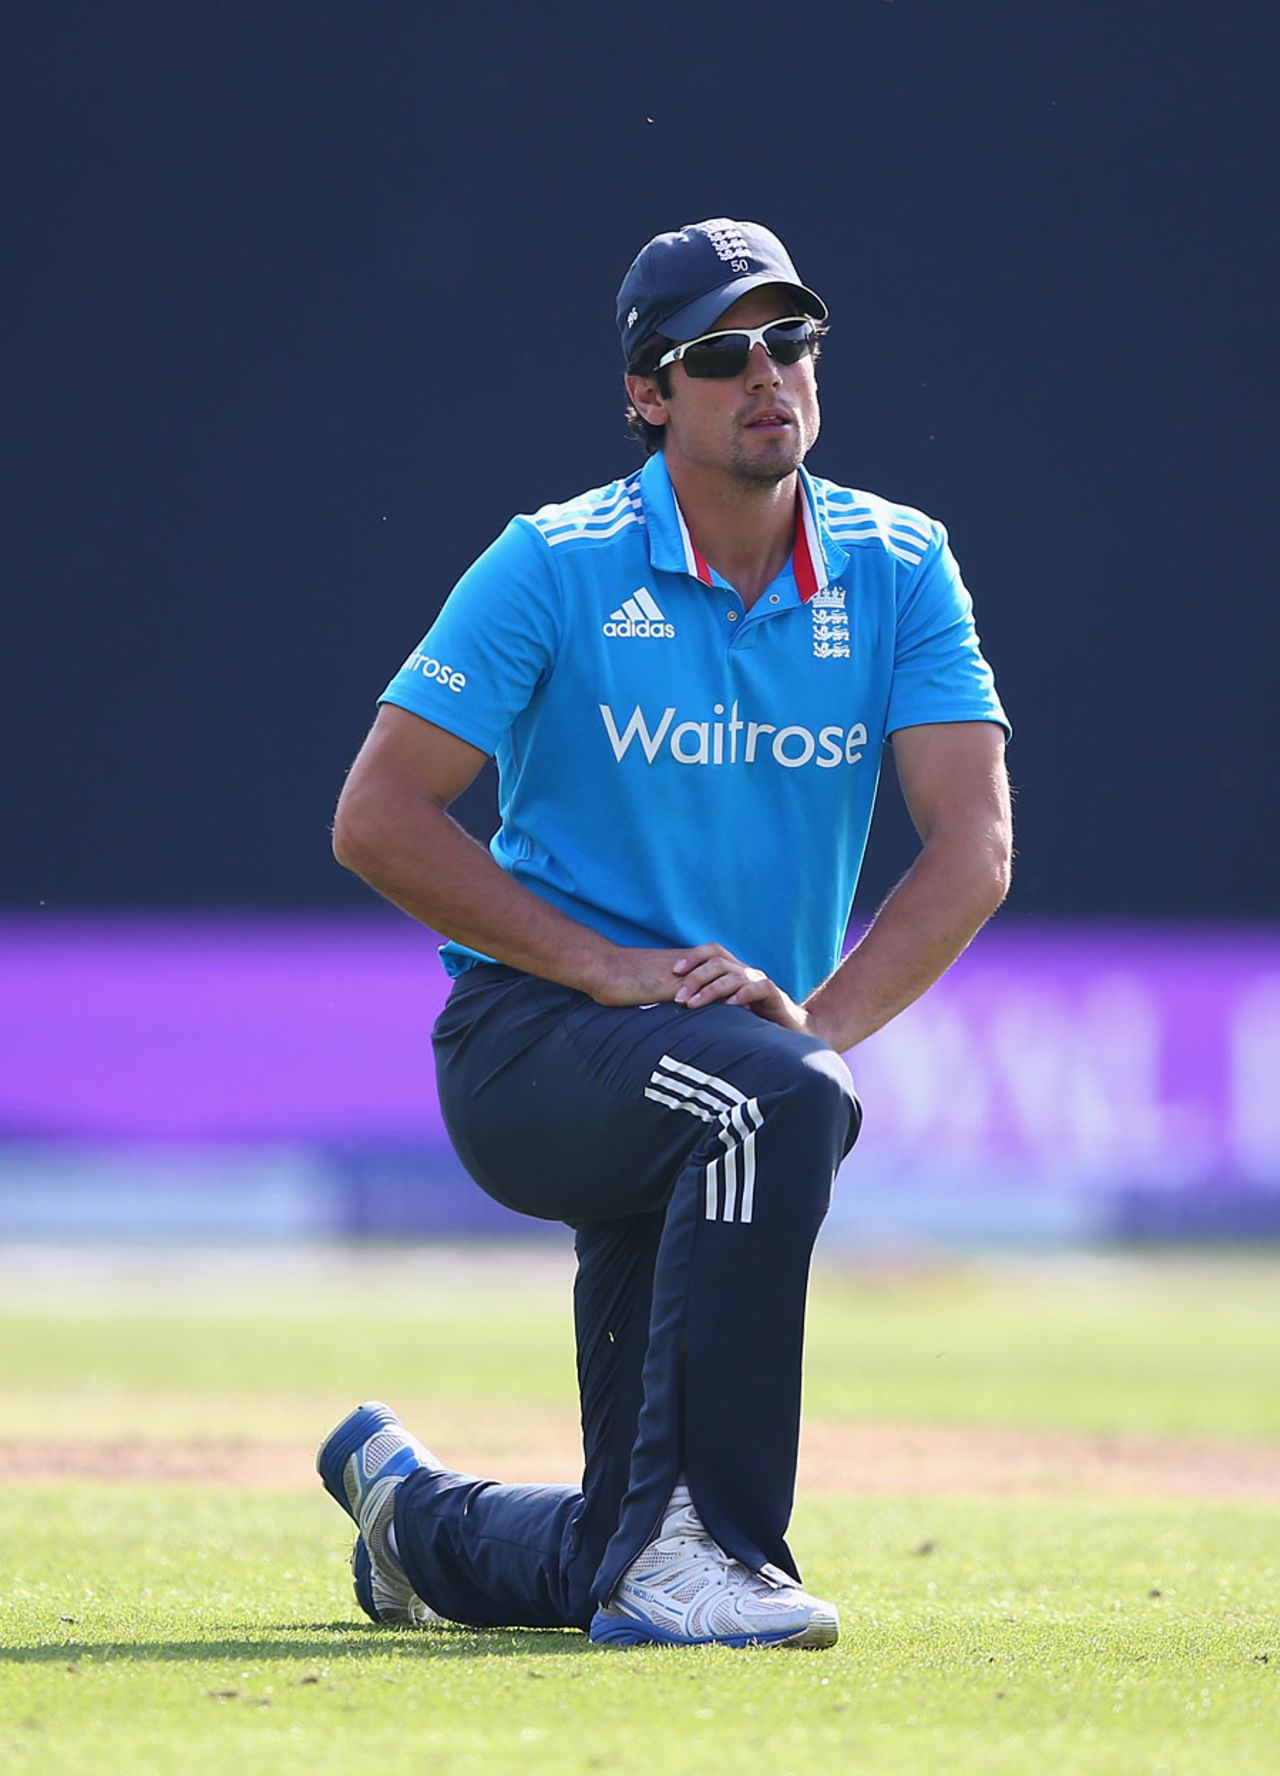 On his knees: Alastair Cook had another day to forget, England v India, 4th ODI, Edgbaston, September 2, 2014